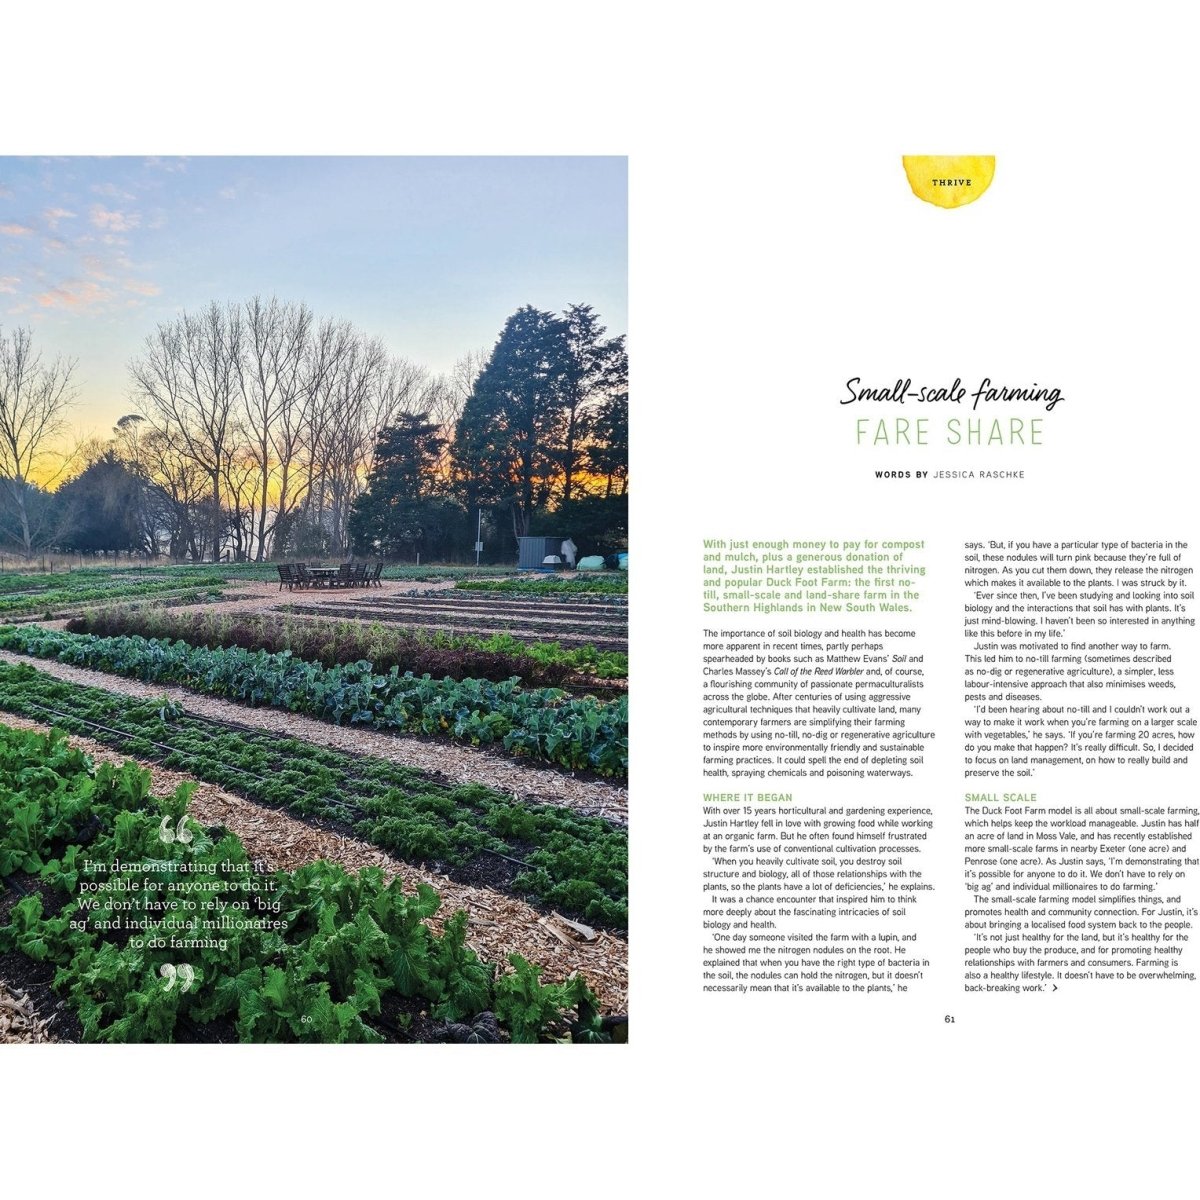 Preview of small scale farming feature in Pip Magazine issue 22